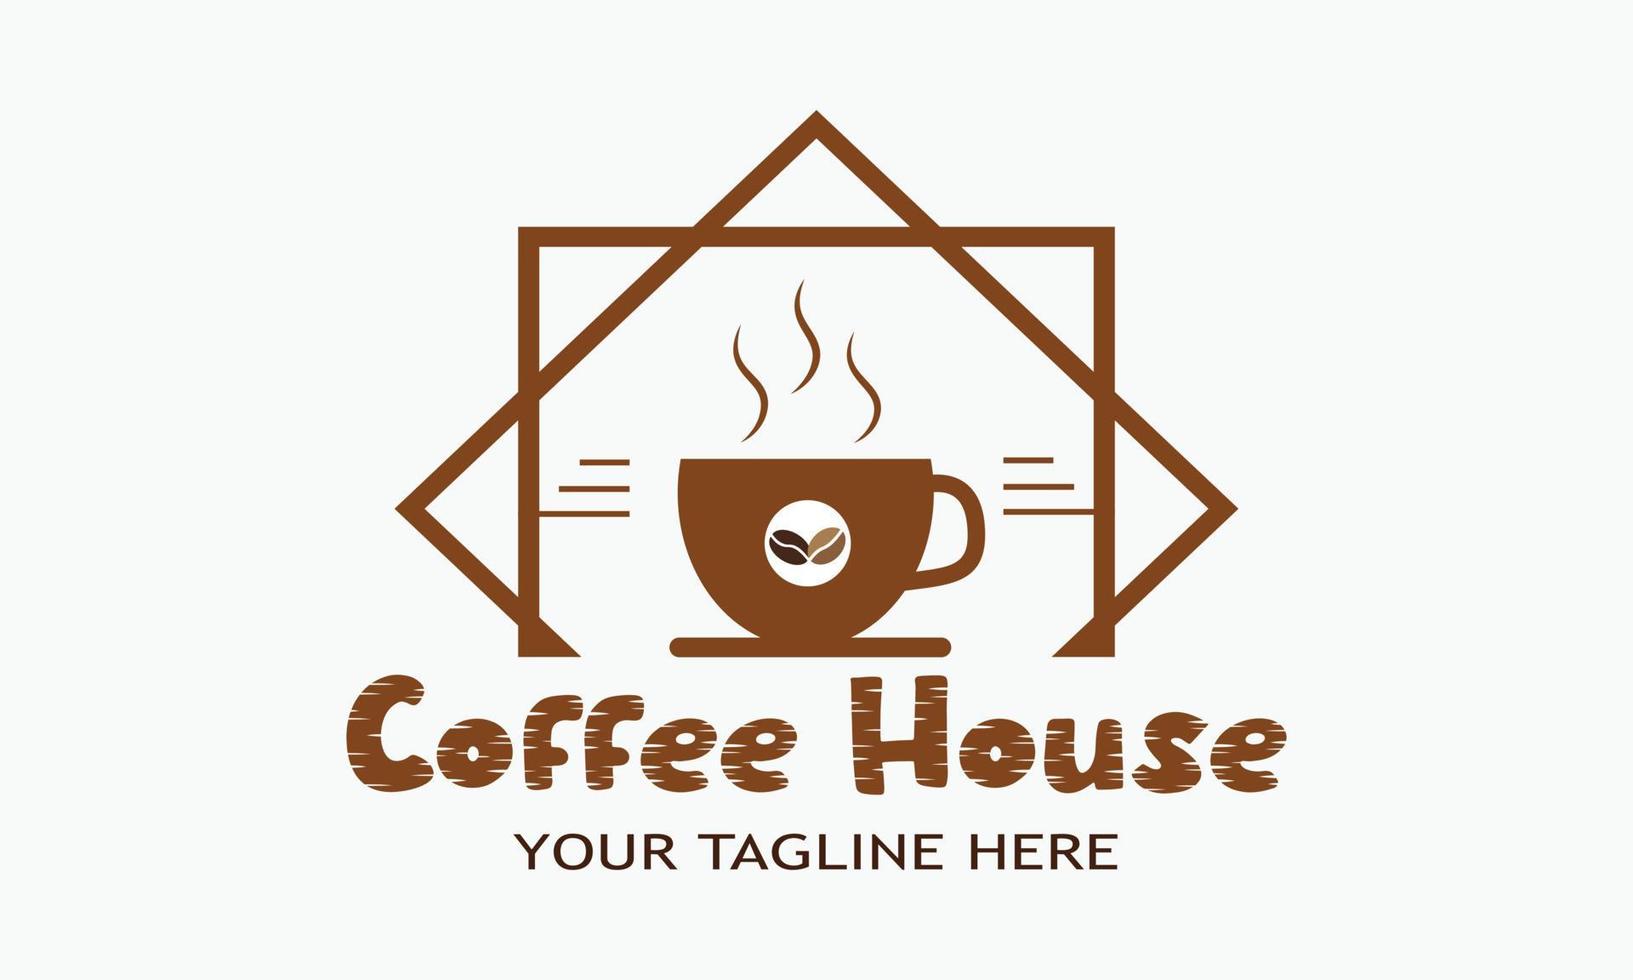 Coffee house coffee Shop logo template vector illustration of a sweet coffee logo